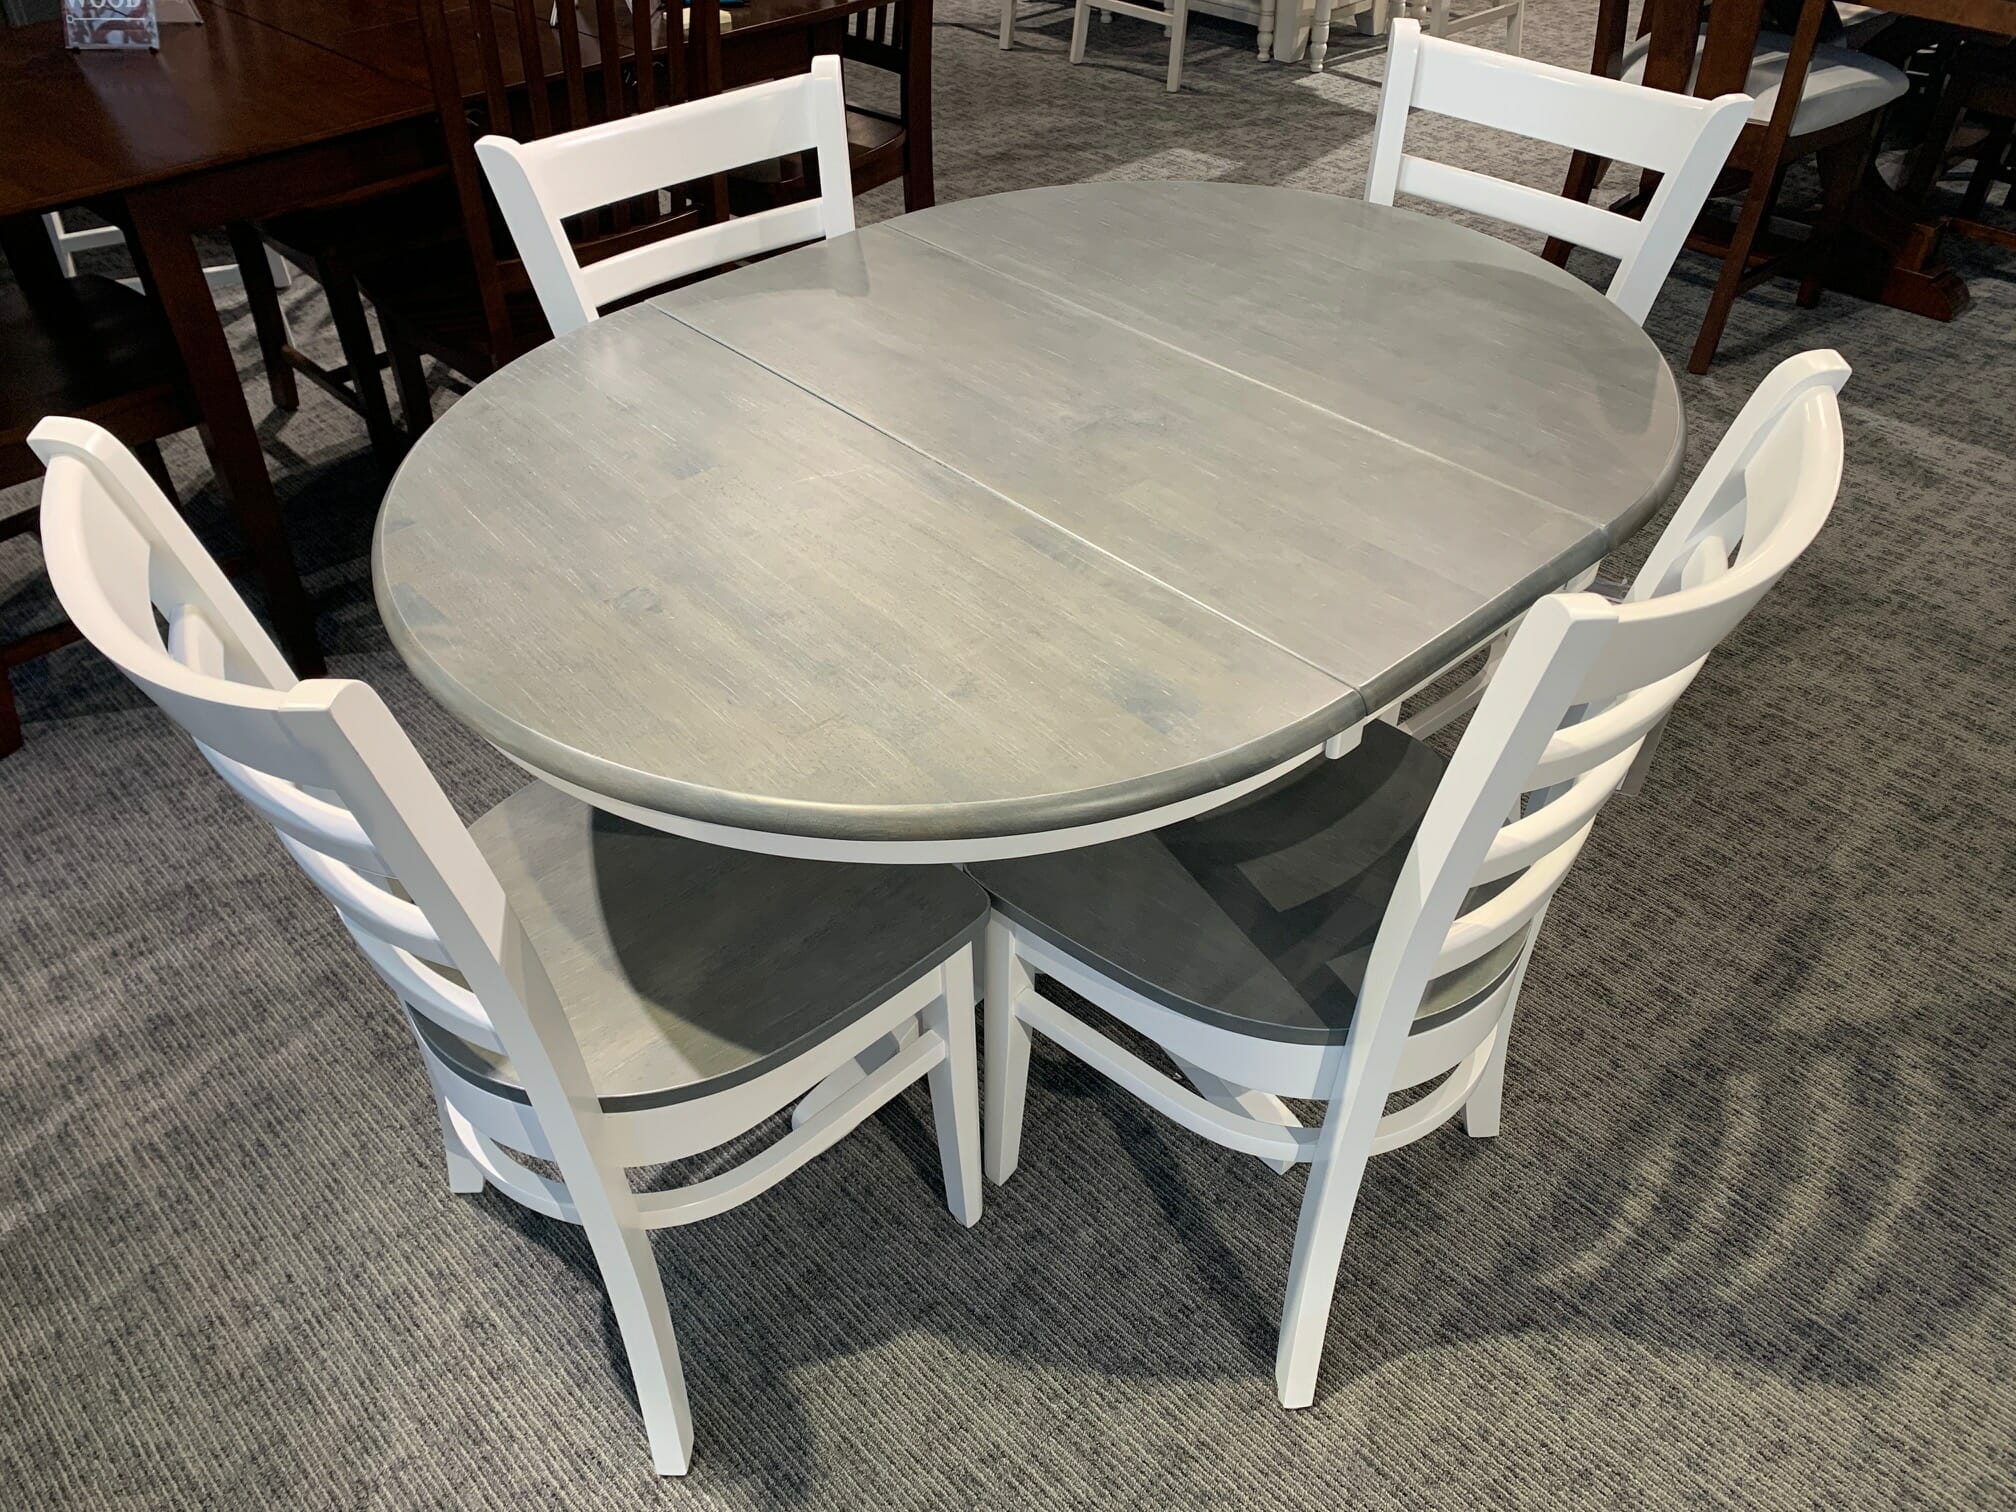 Ww78 Grey And White Pedestal Table 5, White Dining Room Table Set